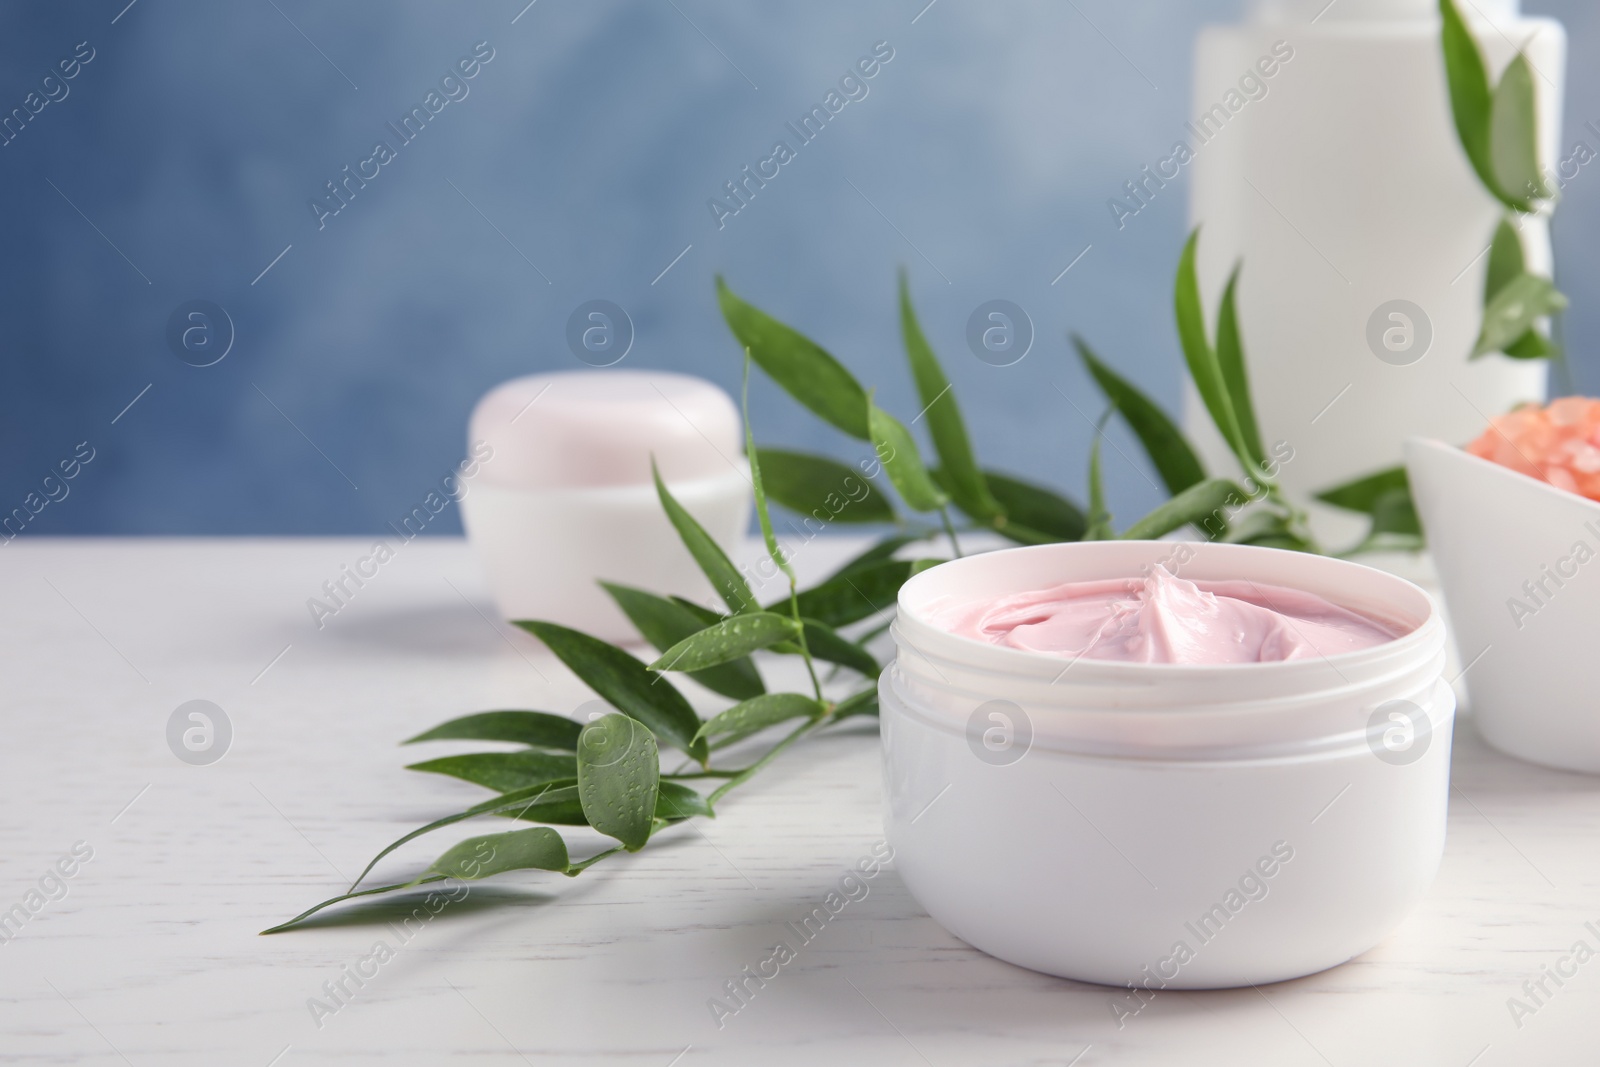 Photo of Jar of body care product on table. Mockup for design